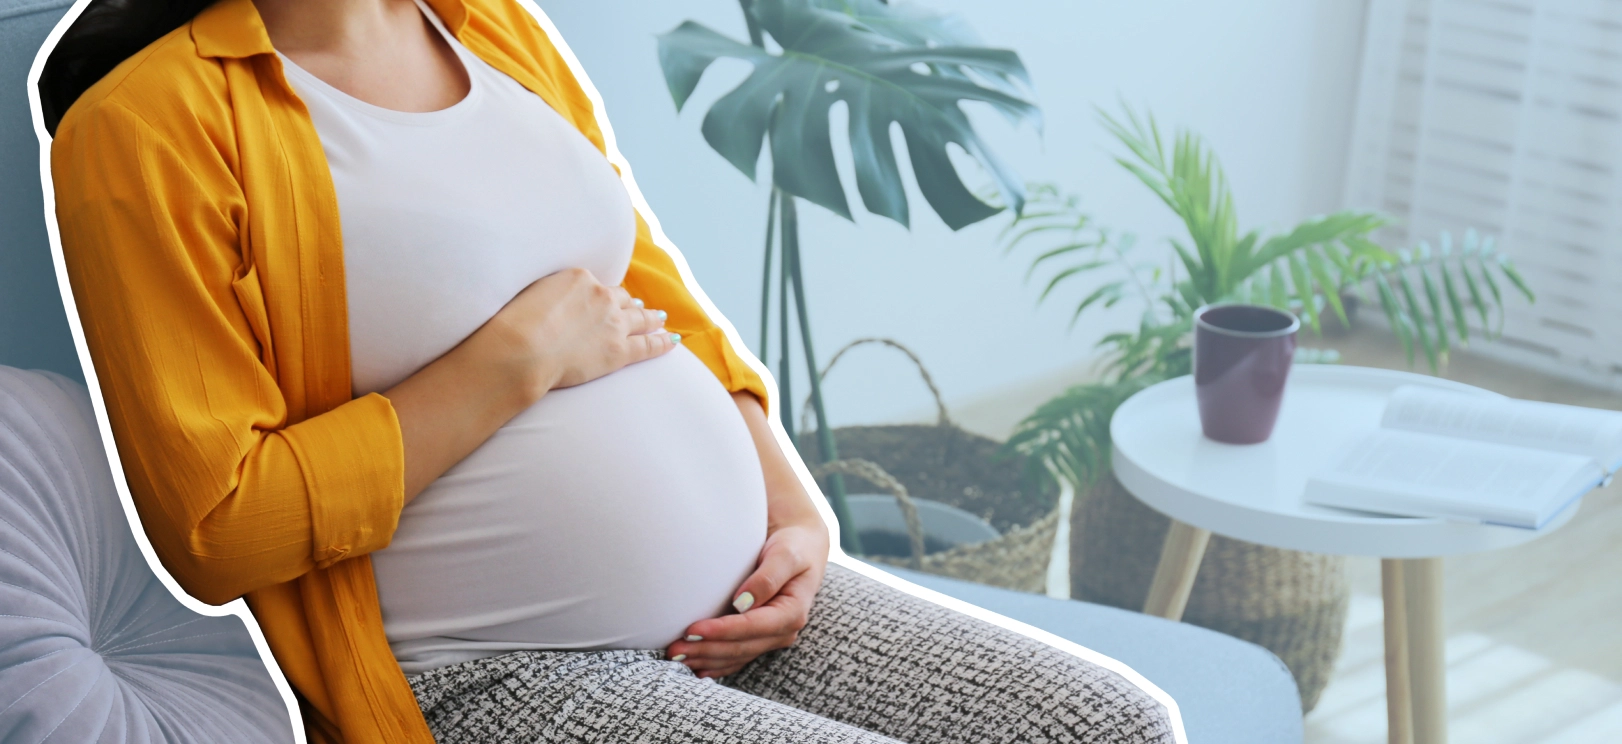 The HR Guide to Pregnancy and Reasonable Accommodation